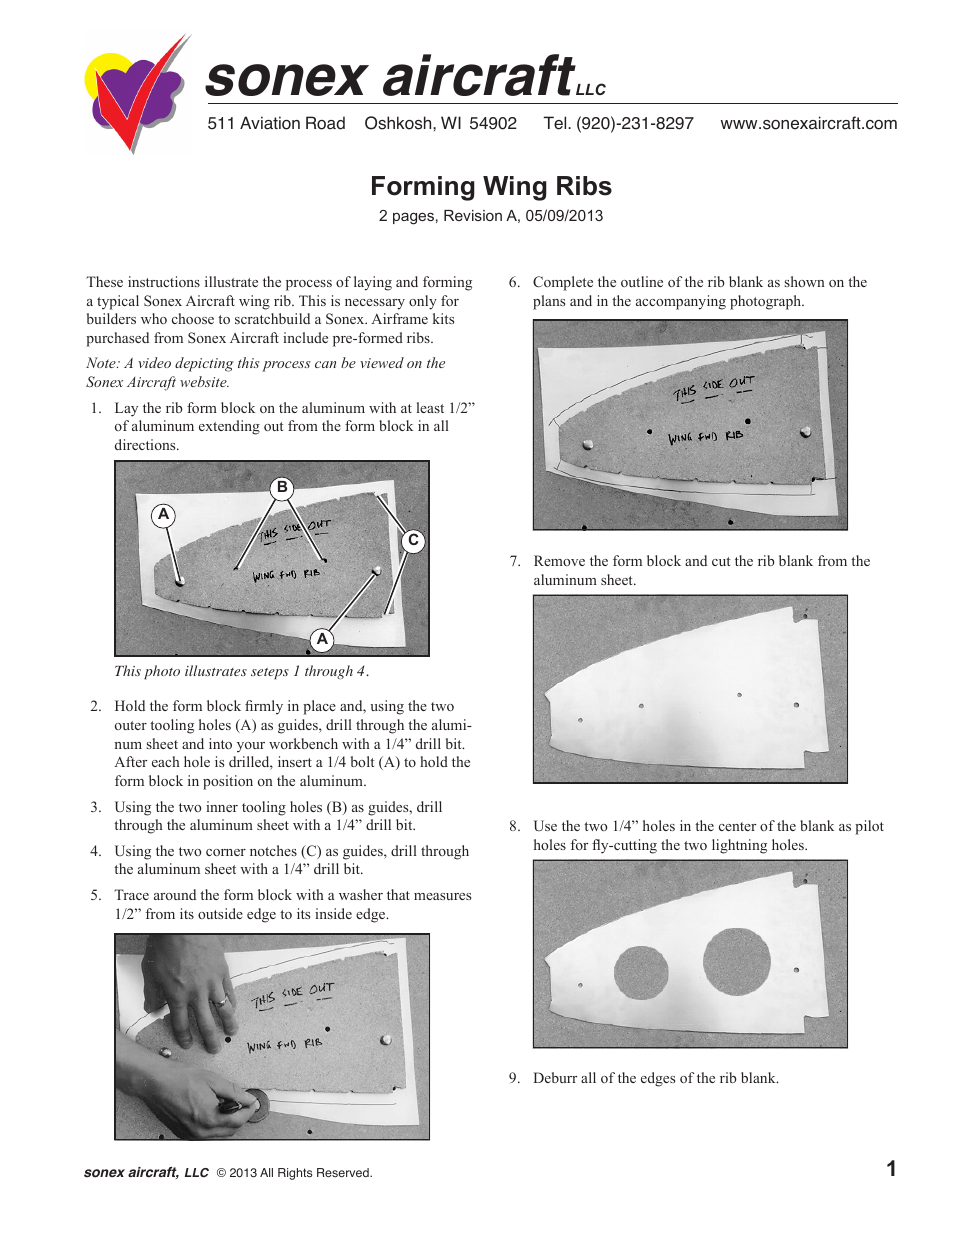 Wing Rib Forming Instructions (Scratch Building)